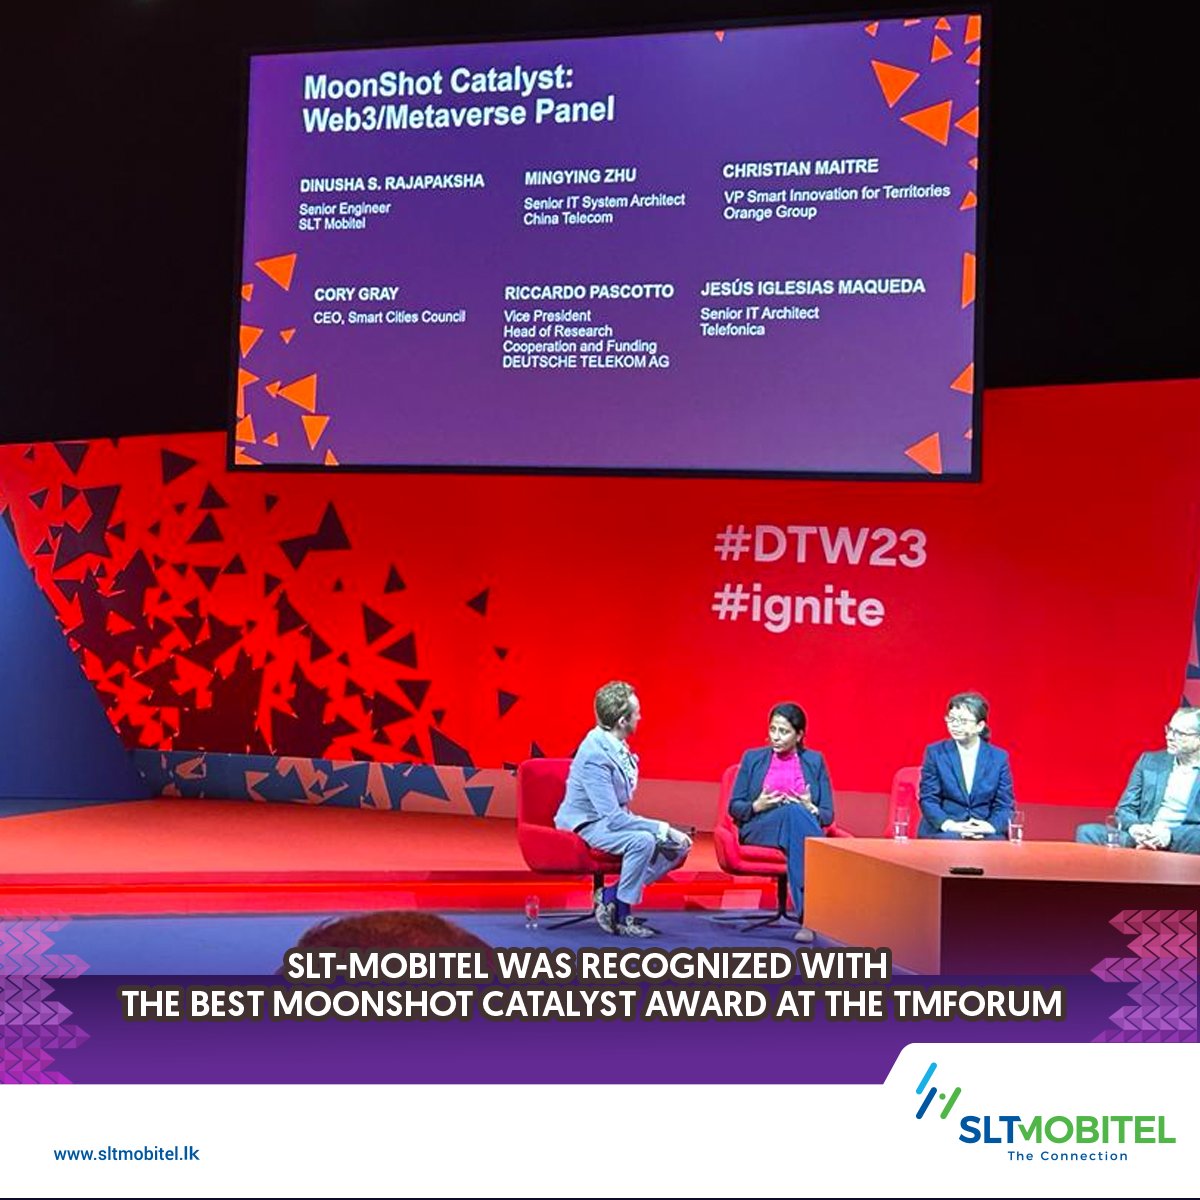 SLT-MOBITEL was honoured with the Moonshot Catalyst Award for its exceptional achievements in bridging gaps and effectively monetizing the Metaverse ecosystem at the TMForum Digital Transformation World (DTW23-Ignite) Conference held in Copenhagen, Denmark.
#SLTMOBITEL